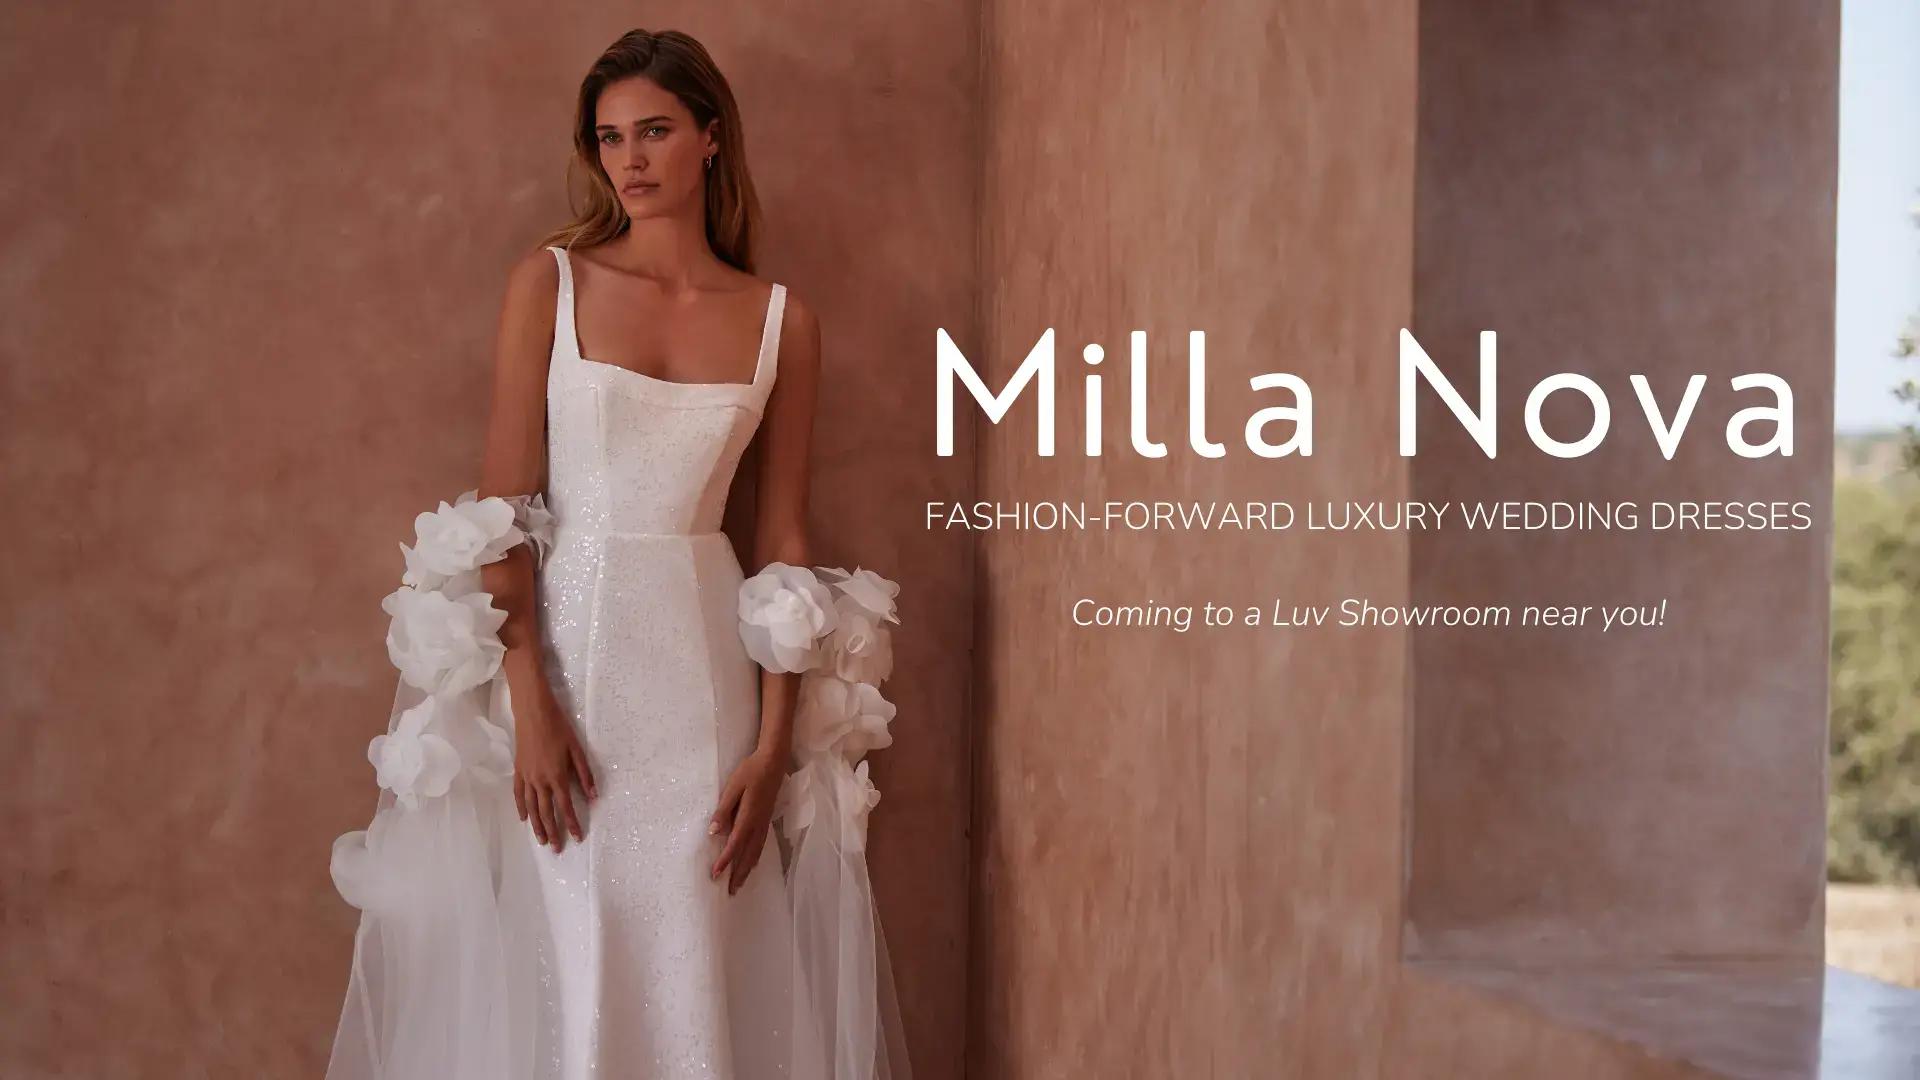 Luv Bridal is now carrying Milla Nova